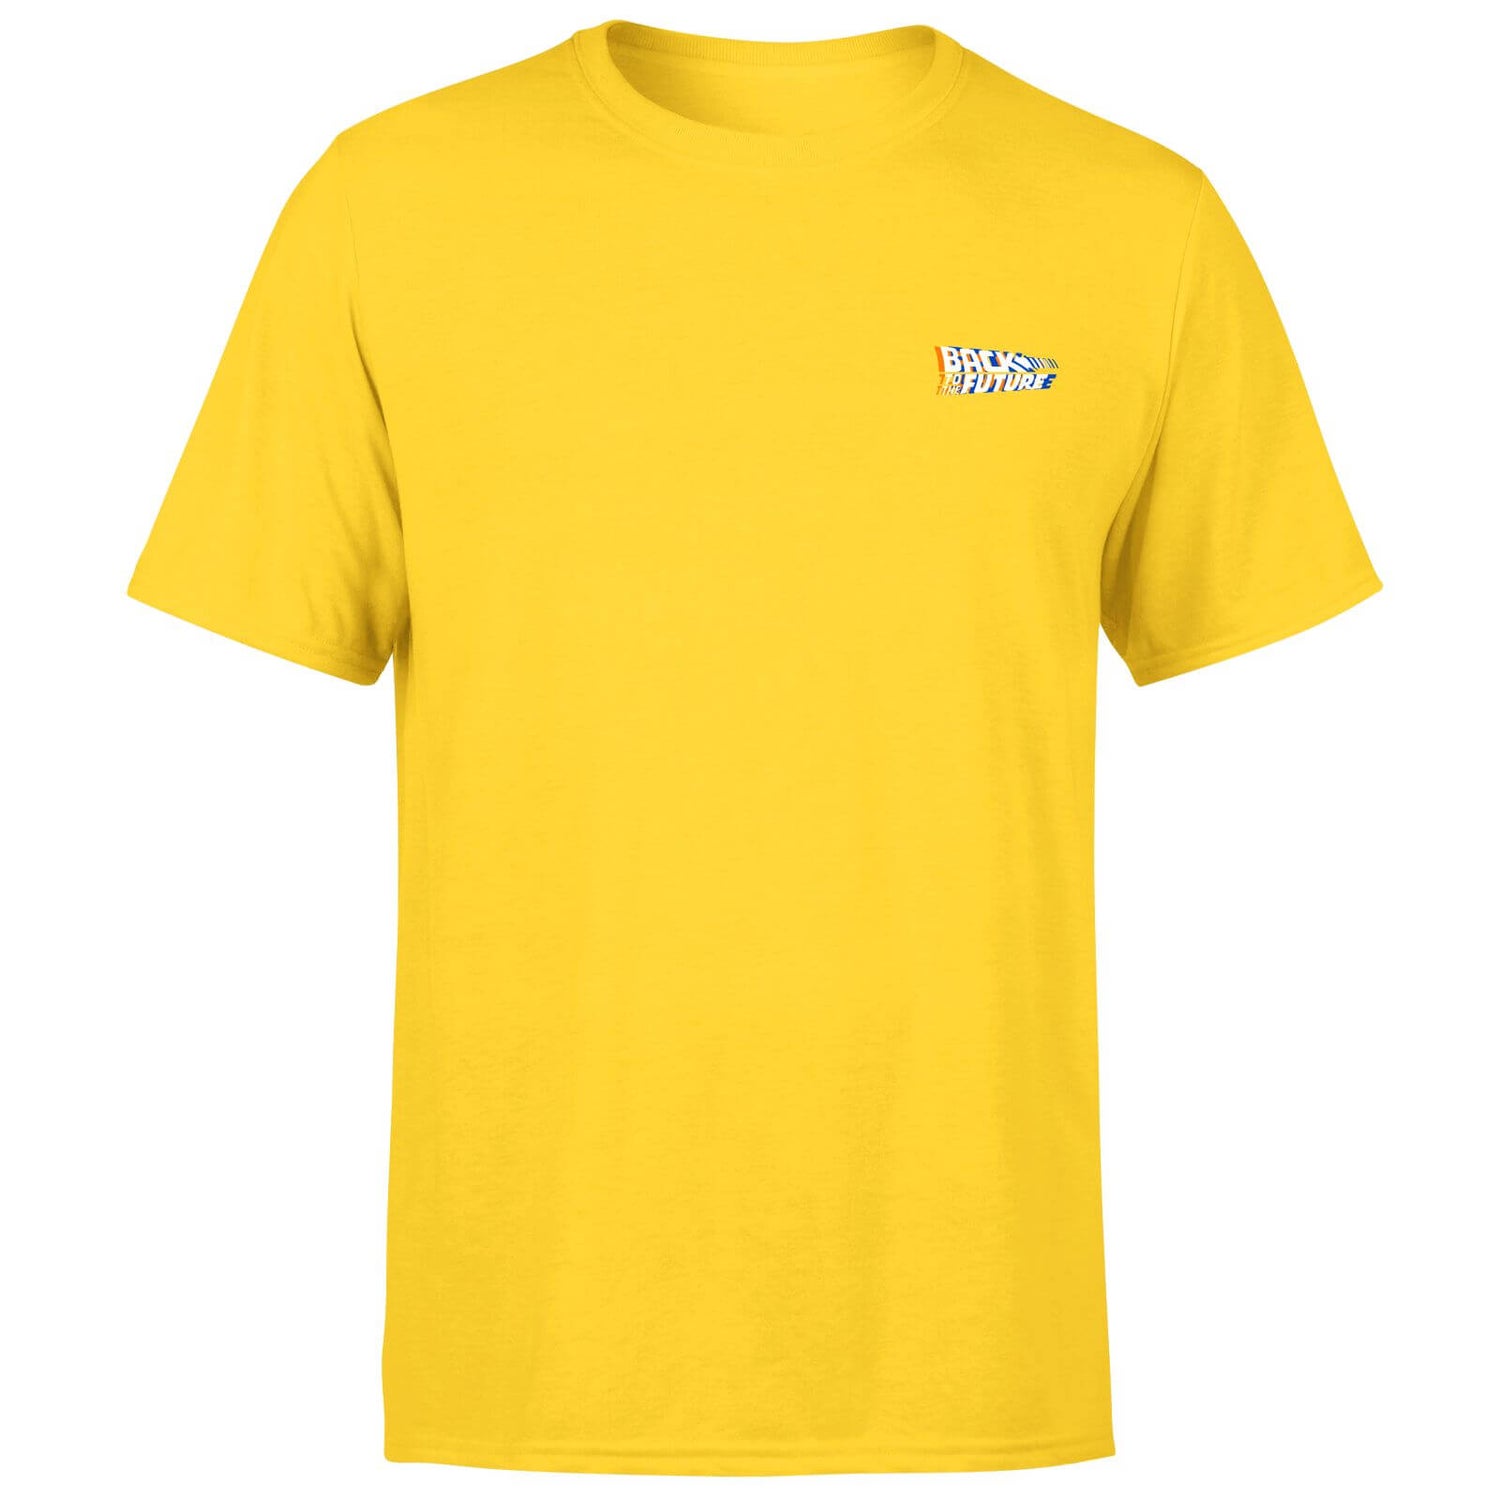 Back To The Future Men's T-Shirt - Yellow